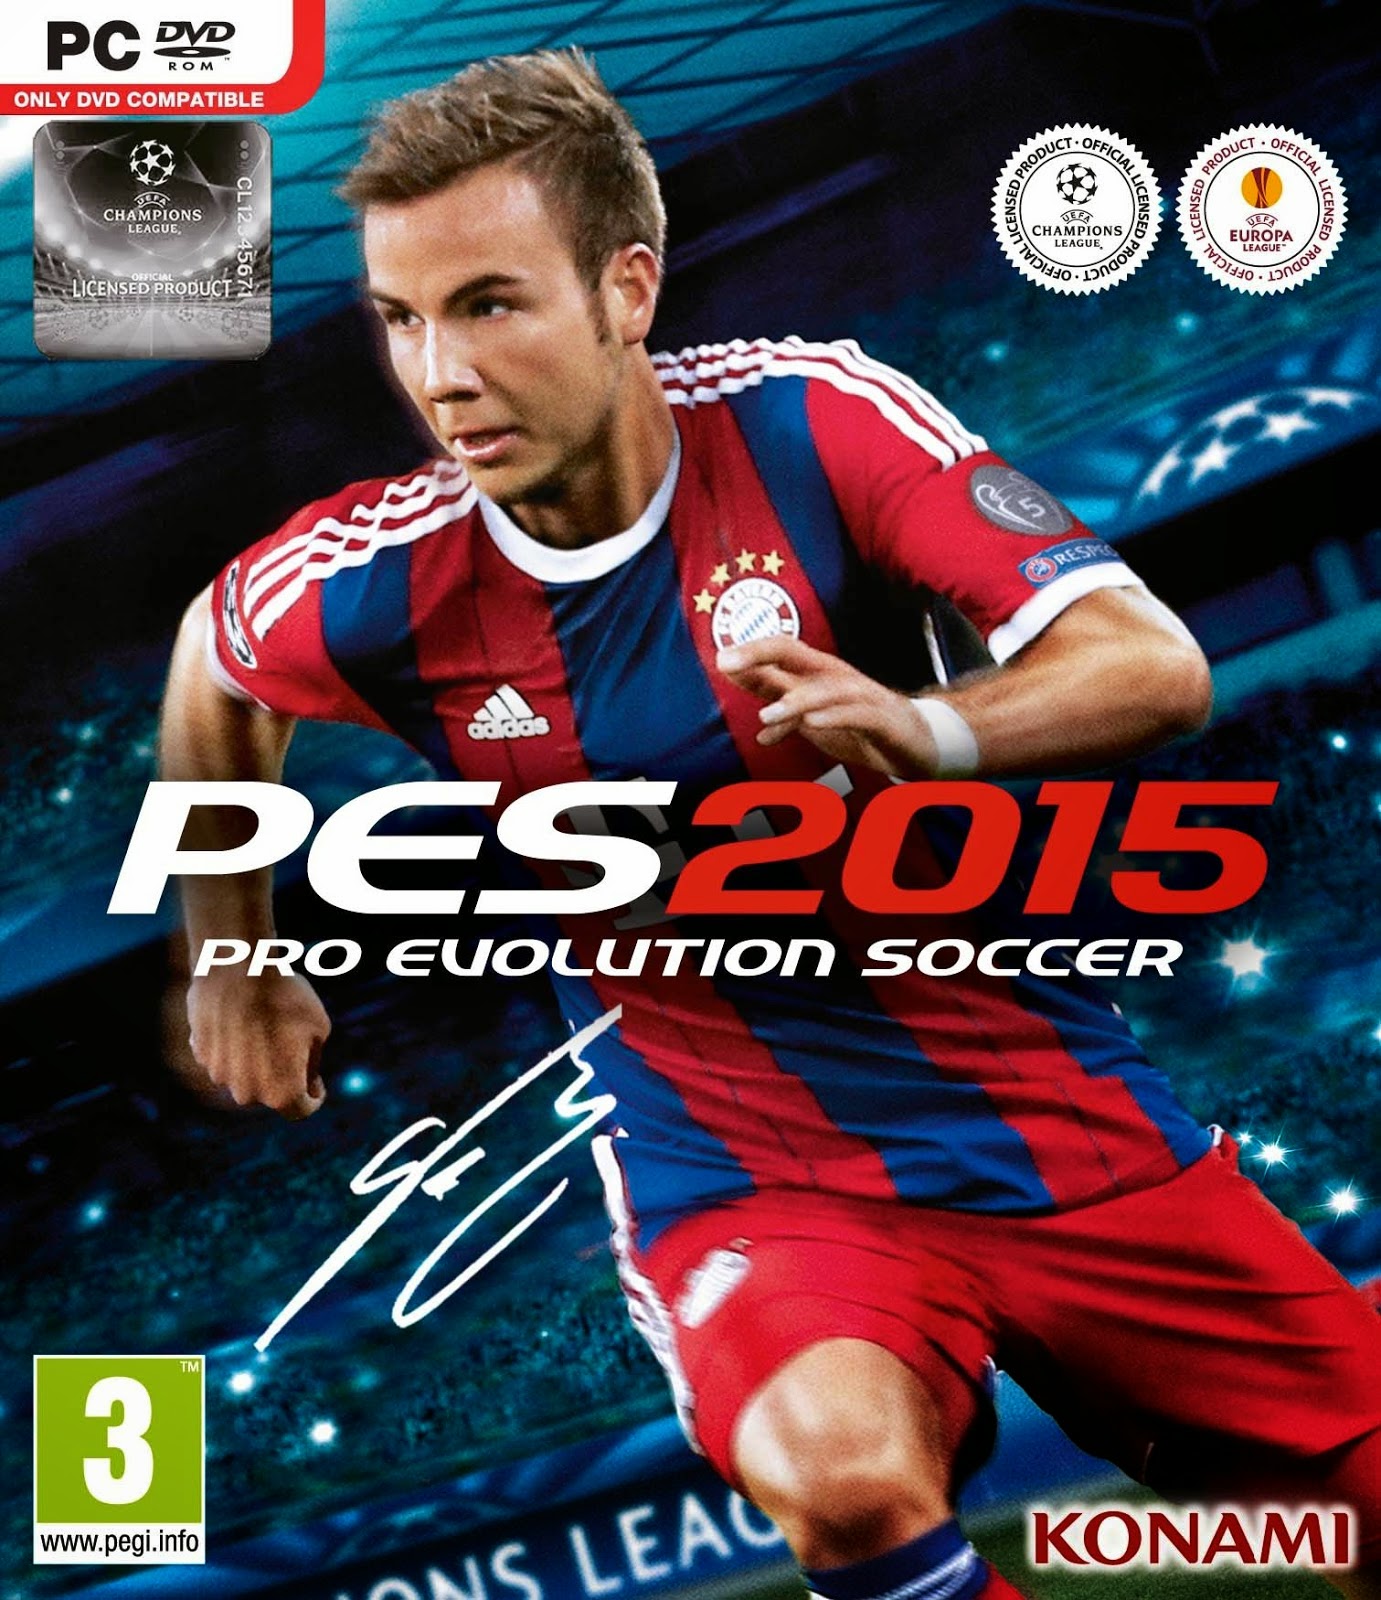 pes 2015 free download for pc full version with crack